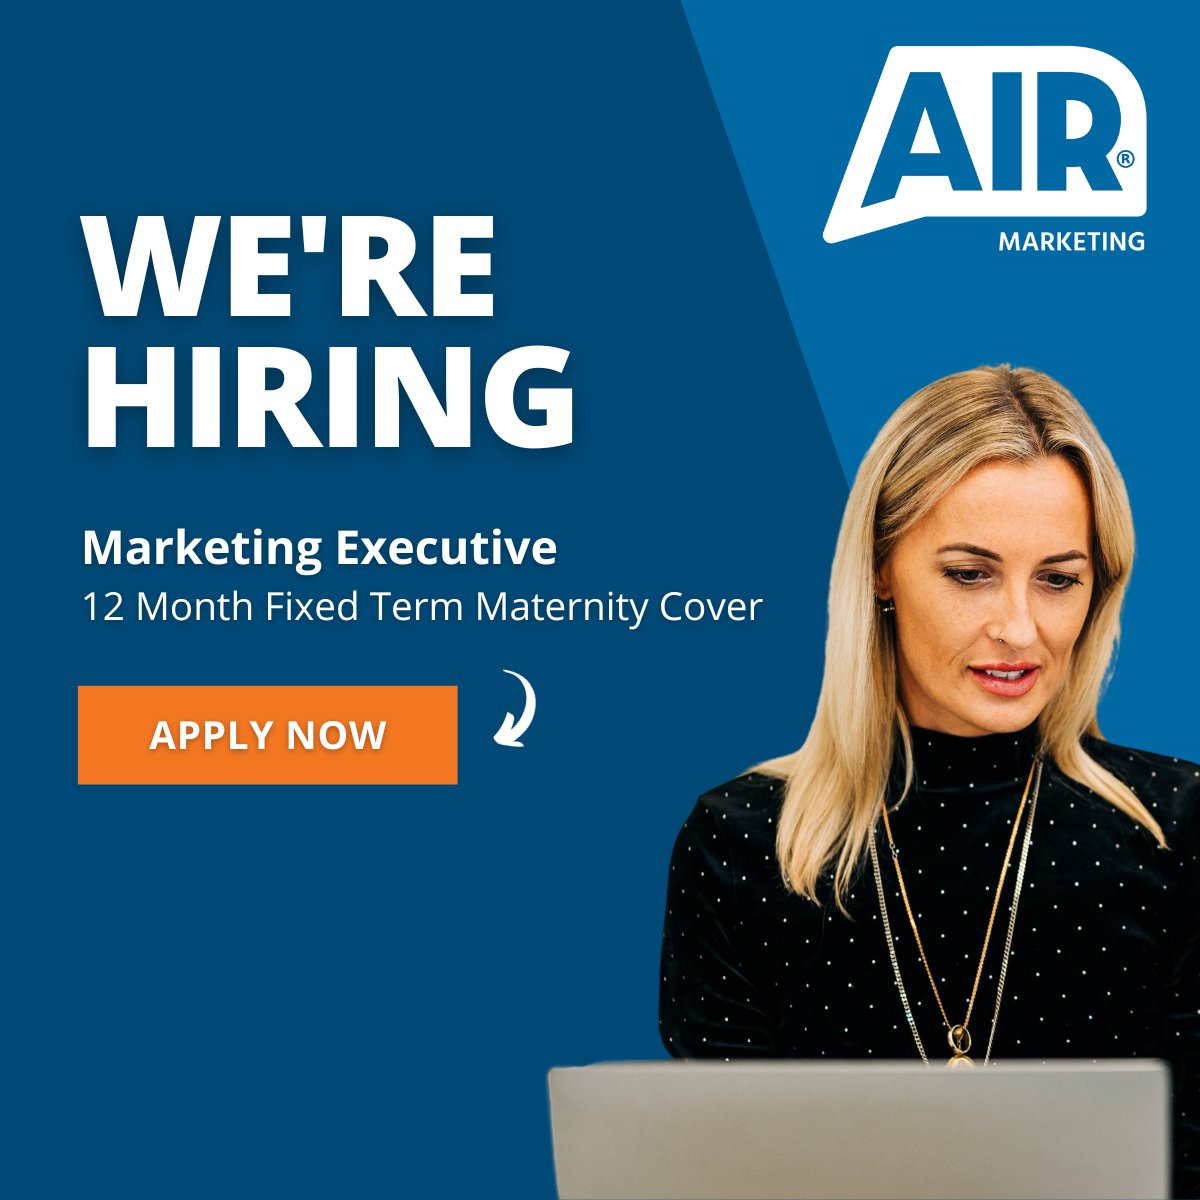 🔍 We're looking for an enthusiastic Marketing Executive to join our team on a 12 Month Fixed Term Maternity Cover Contract! Apply for the role here: bit.ly/3HwEHl1

@Exeter_Works

#TeamAir #Recruitment #MarketingCareer #MarketingJob #Jobs